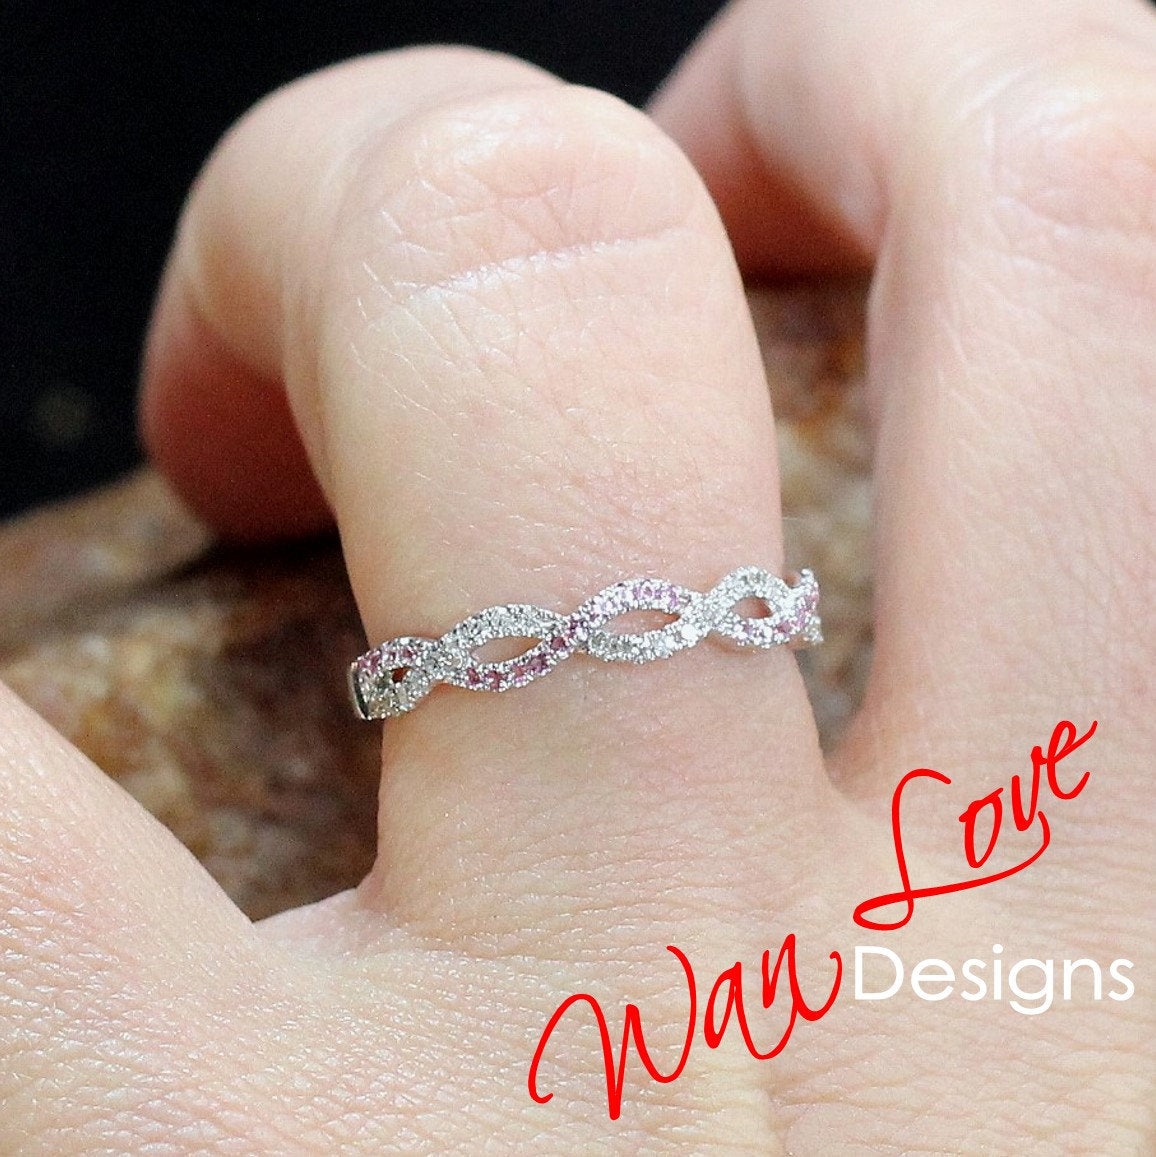 Infinity Twist Pink Sapphire Diamond Band, Round Twisted Curved Pink Moissanite Ring, Braided Wedding Band, Bridal Gold Birthstone Jewelry Wan Love Designs